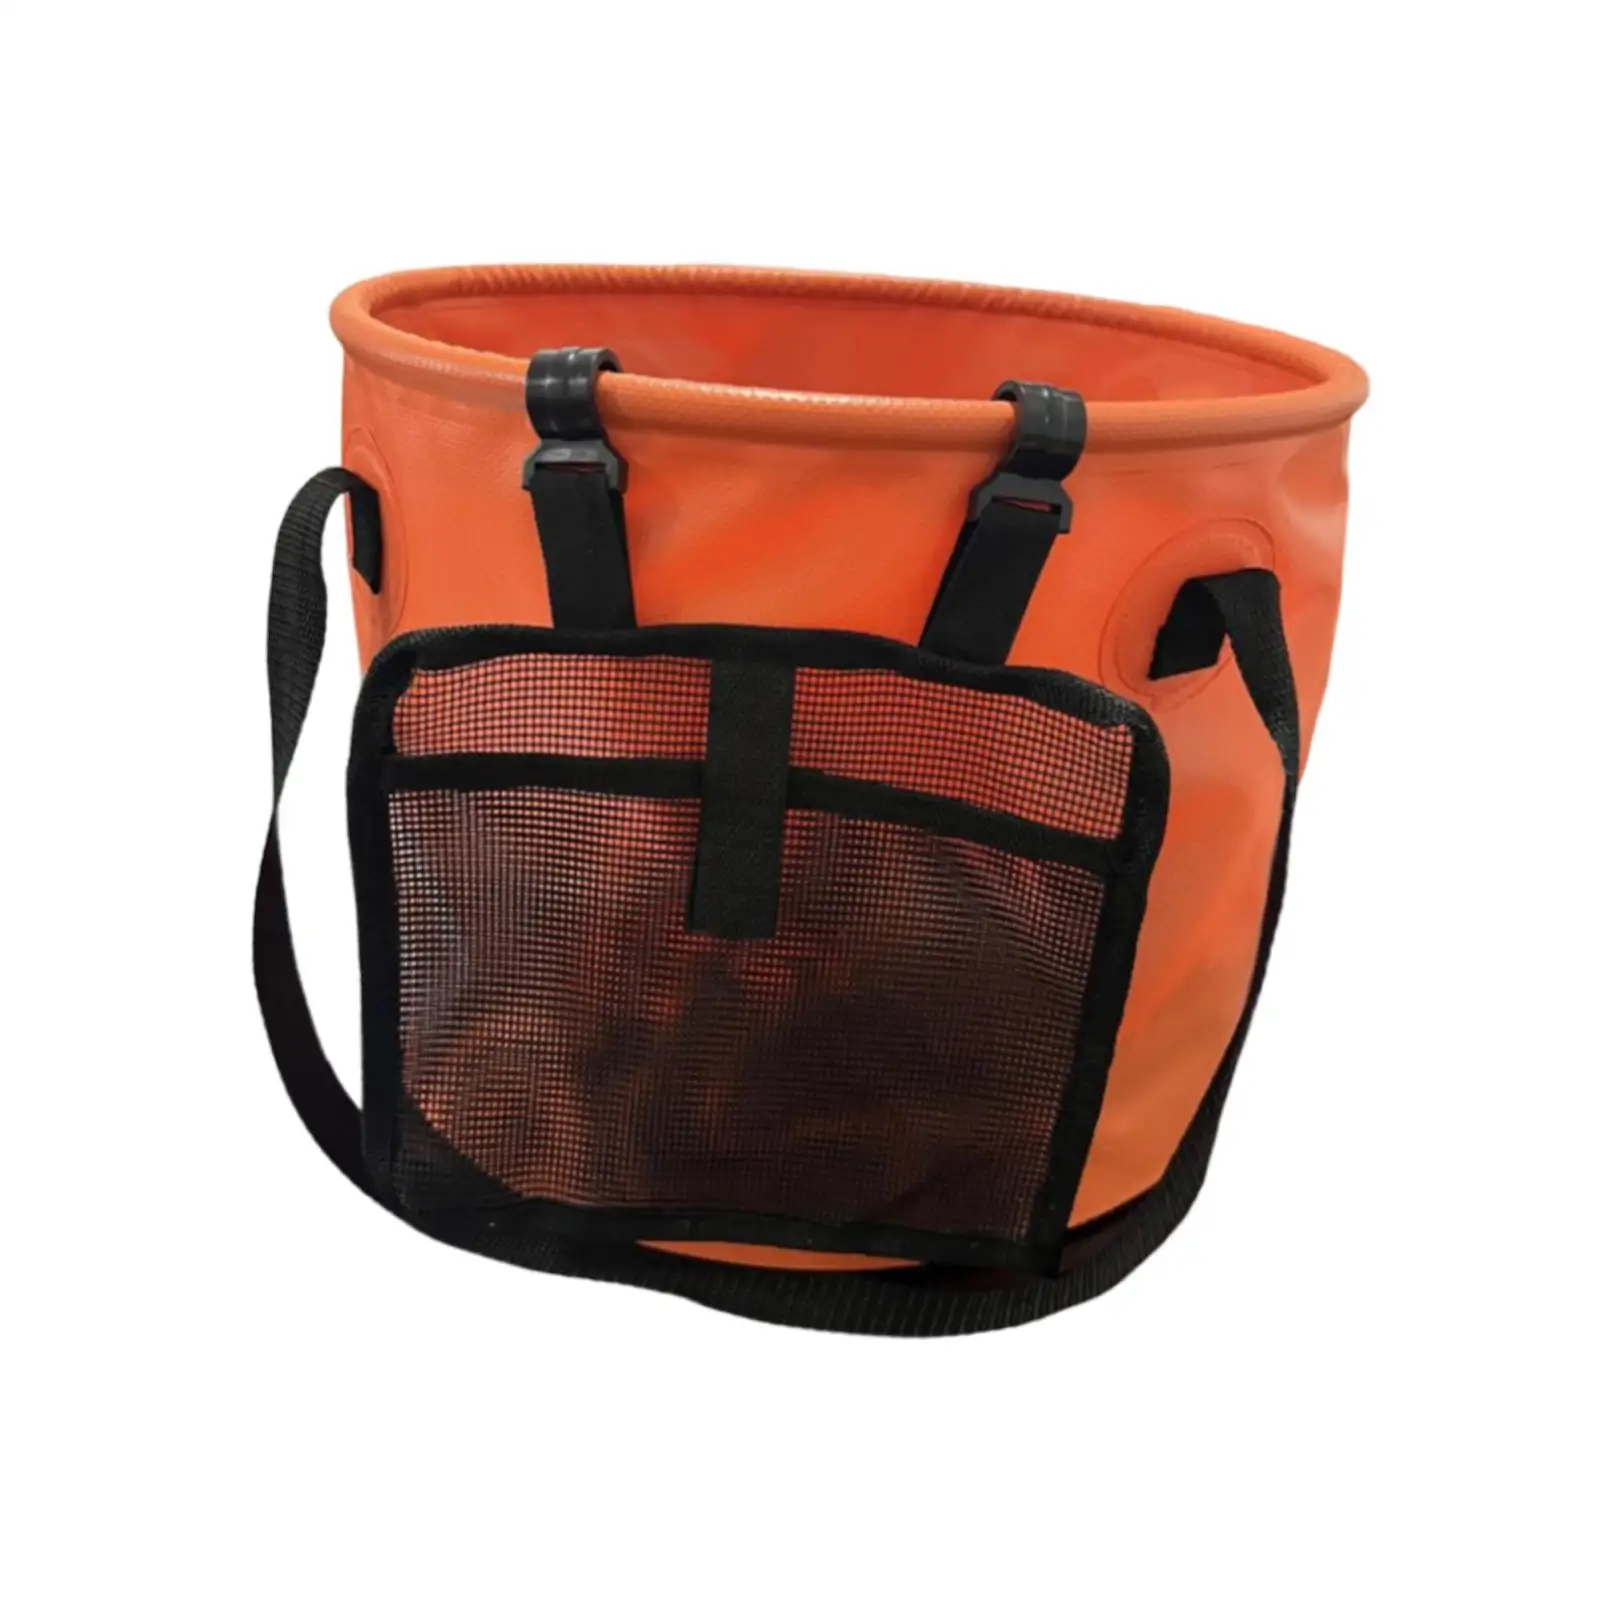 Water Container Water Bag Travel Collapsible Bucket for Hiking Boating Beach